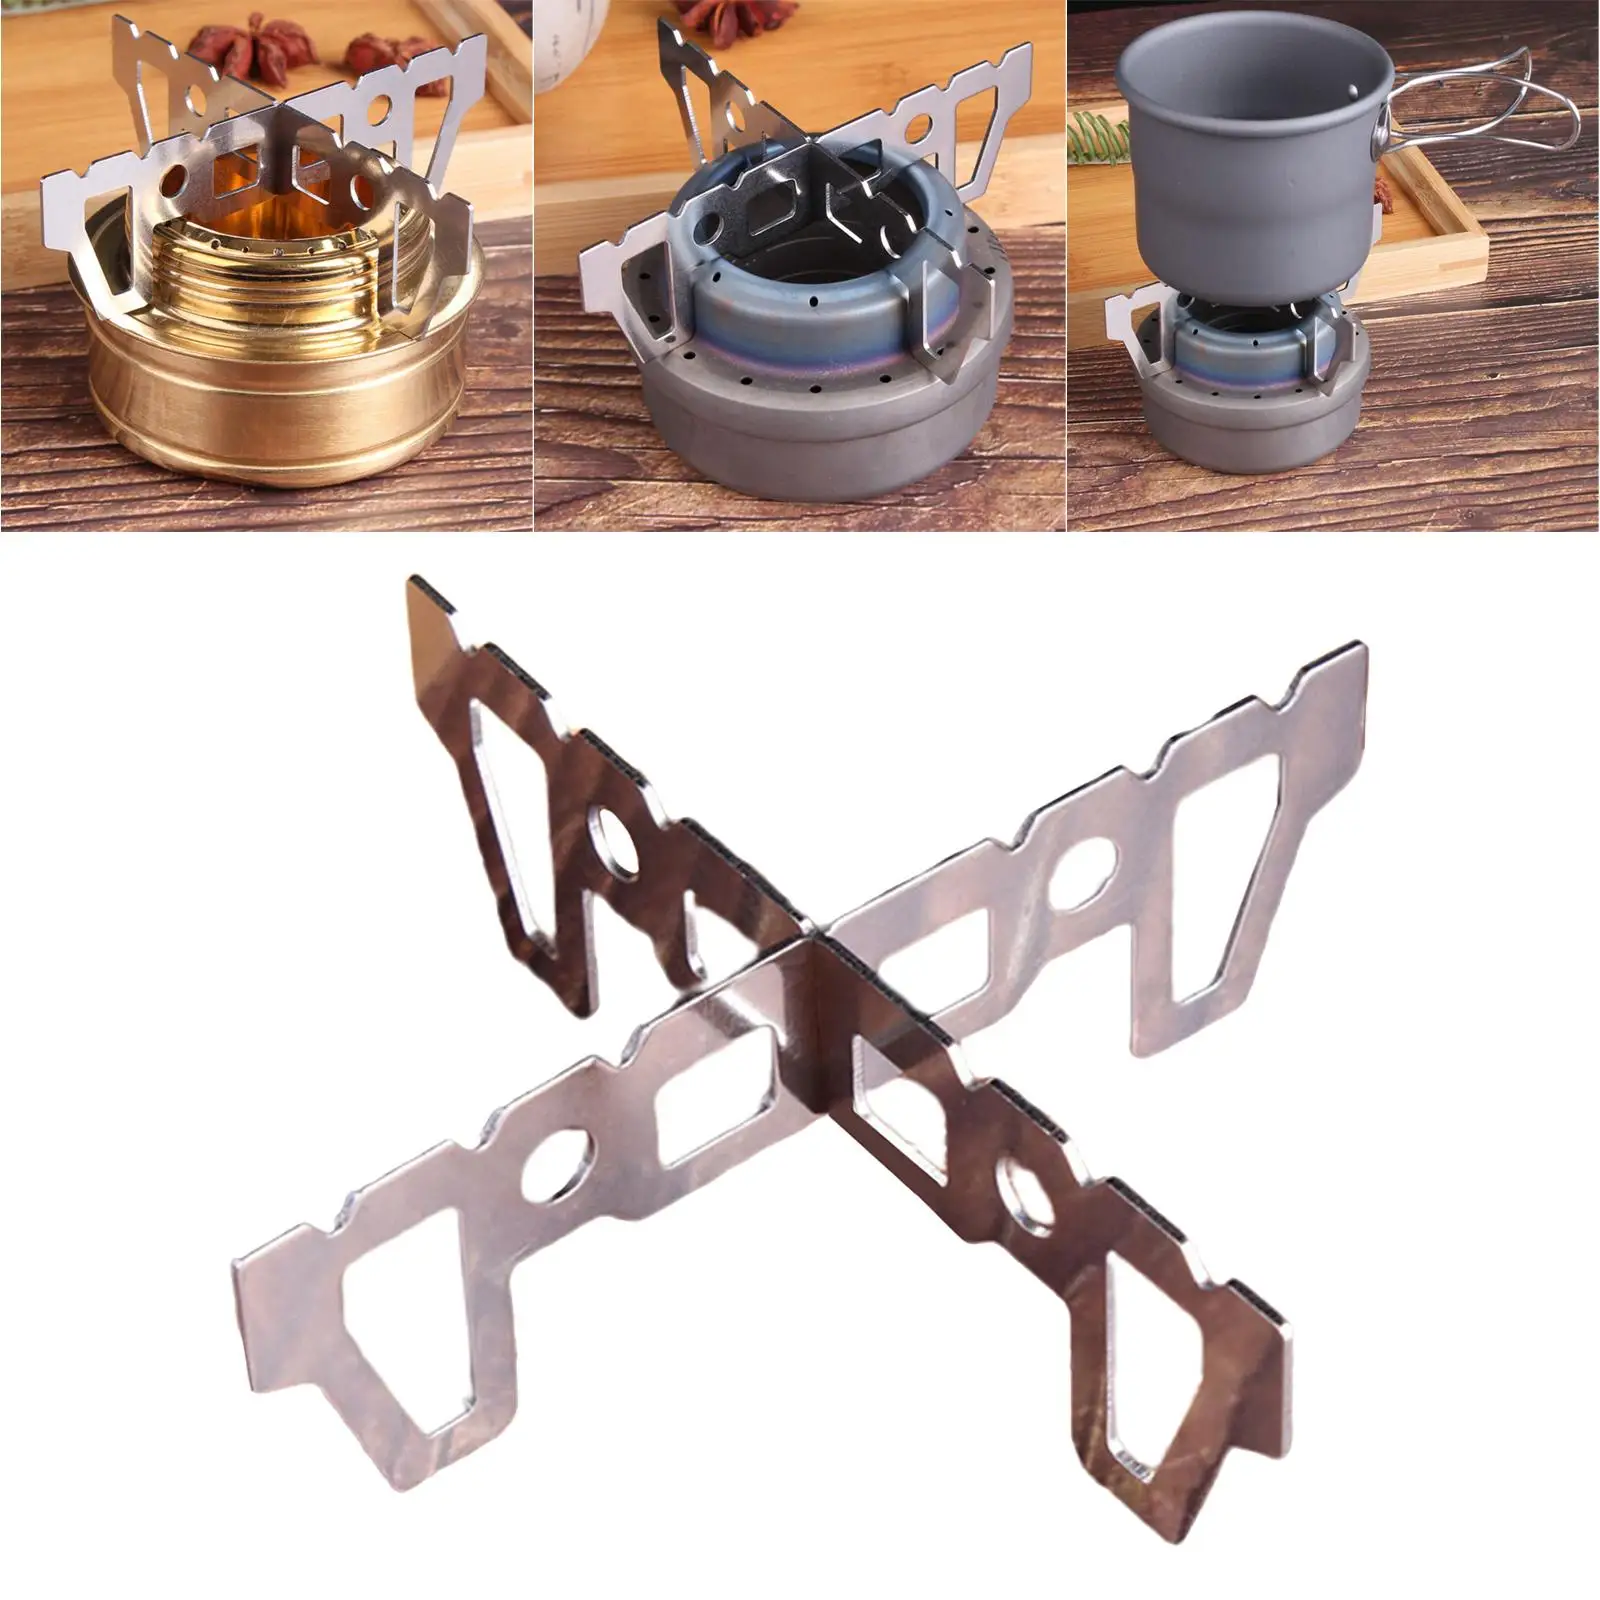 Ti  Stove Stand Portable  Stove Accessories Stand Furnace Core Support #Spirit Burner Outdoor Camping Stove for Cooker Outdoor